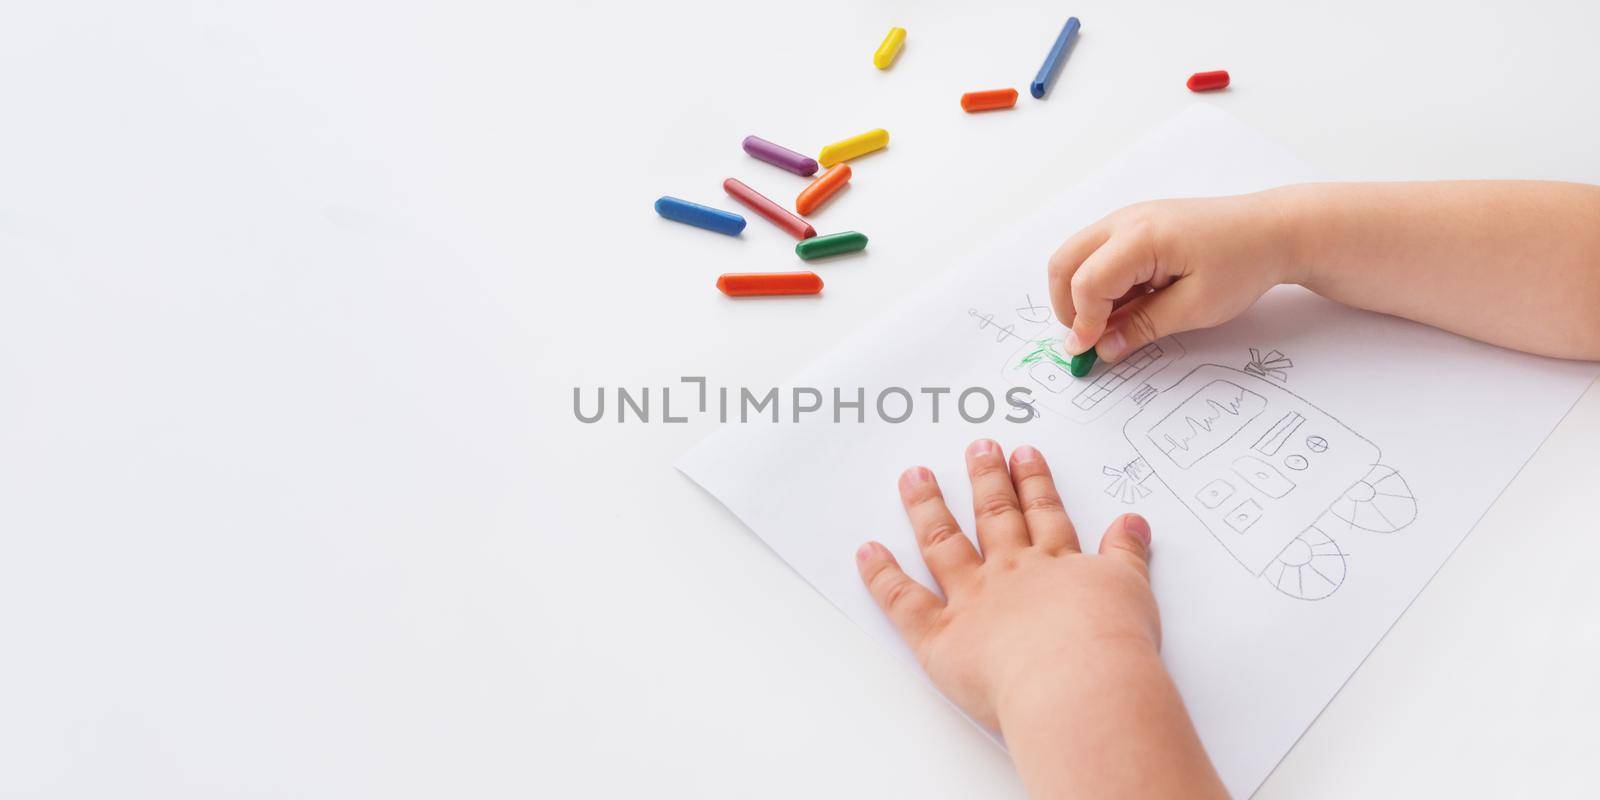 Toddler draws colorful robot. Kid uses wax crayons to paint it. Coloring pages to train fine motor skills on white background with copy space.